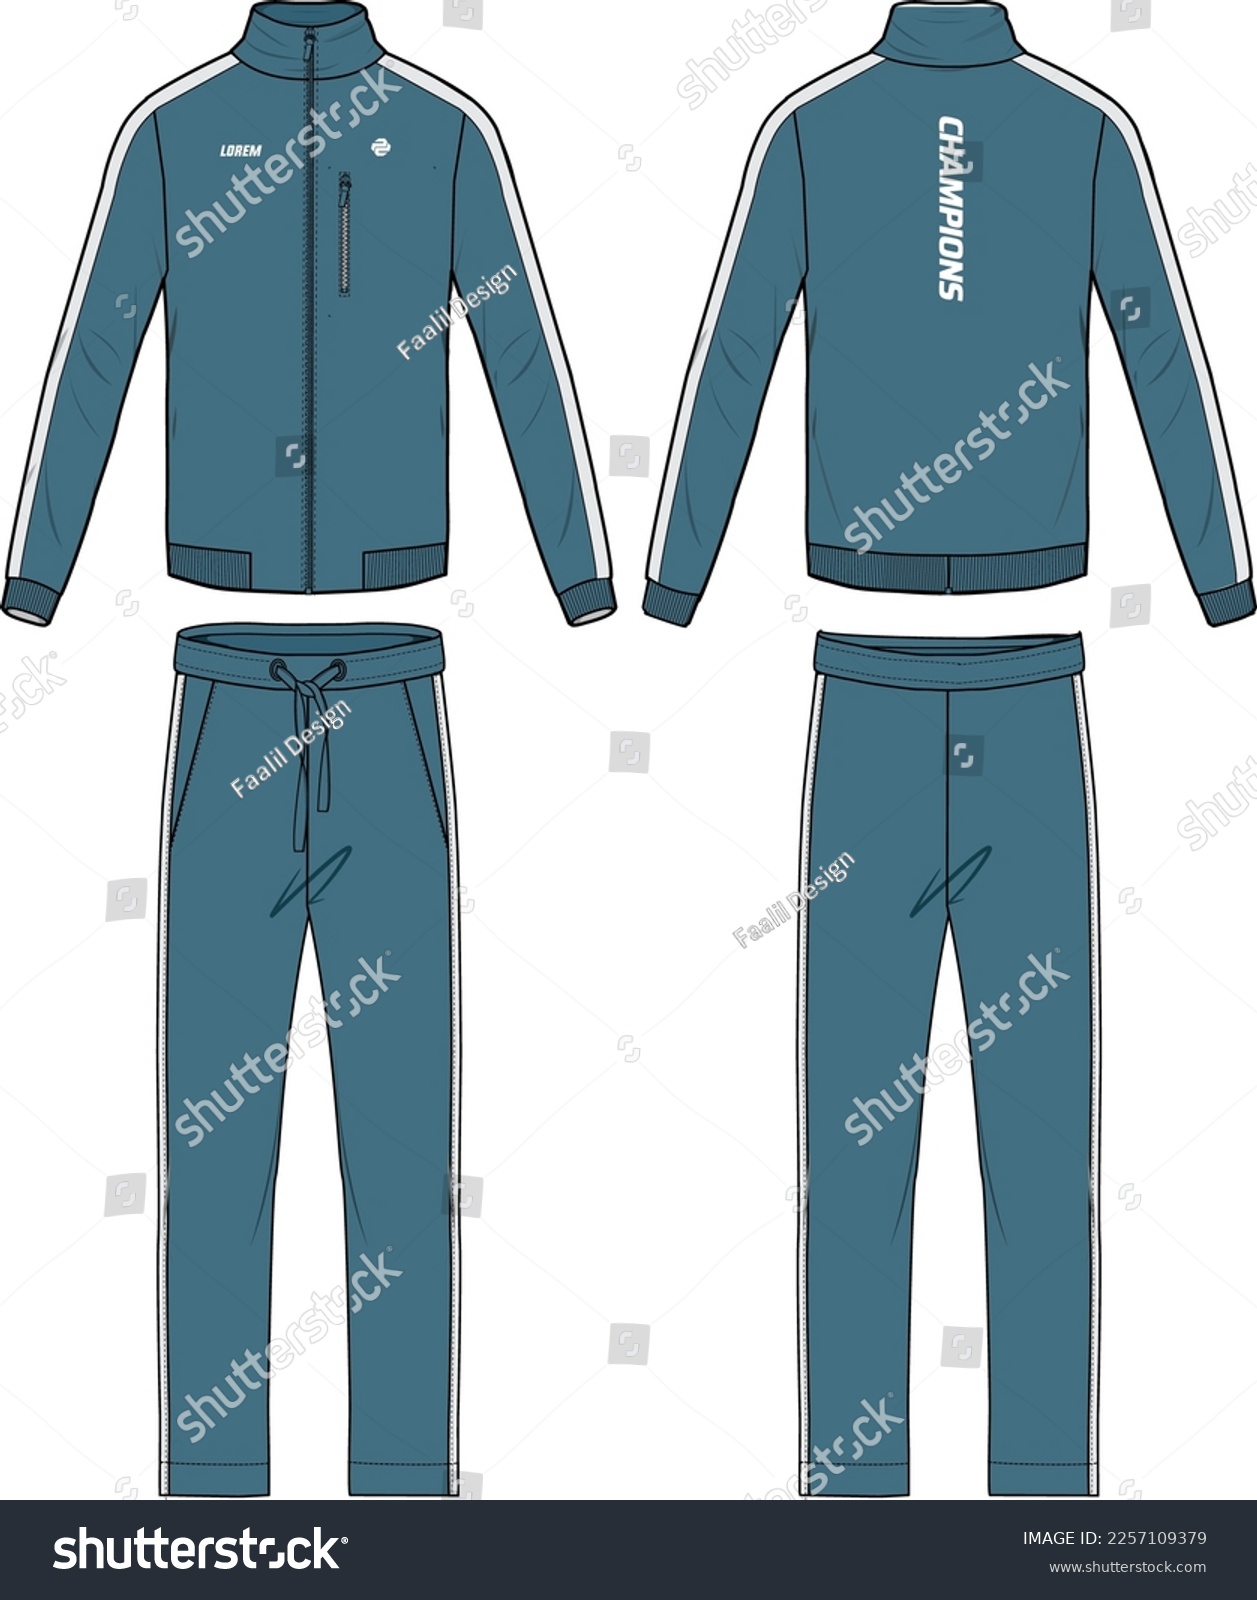 SVG of Long sleeve track suit jacket sweatshirt with jogger track bottom design flat sketch Illustration, running jacket with sweat pant front and back view, winter jacket for Men and women. Winter outerwear svg